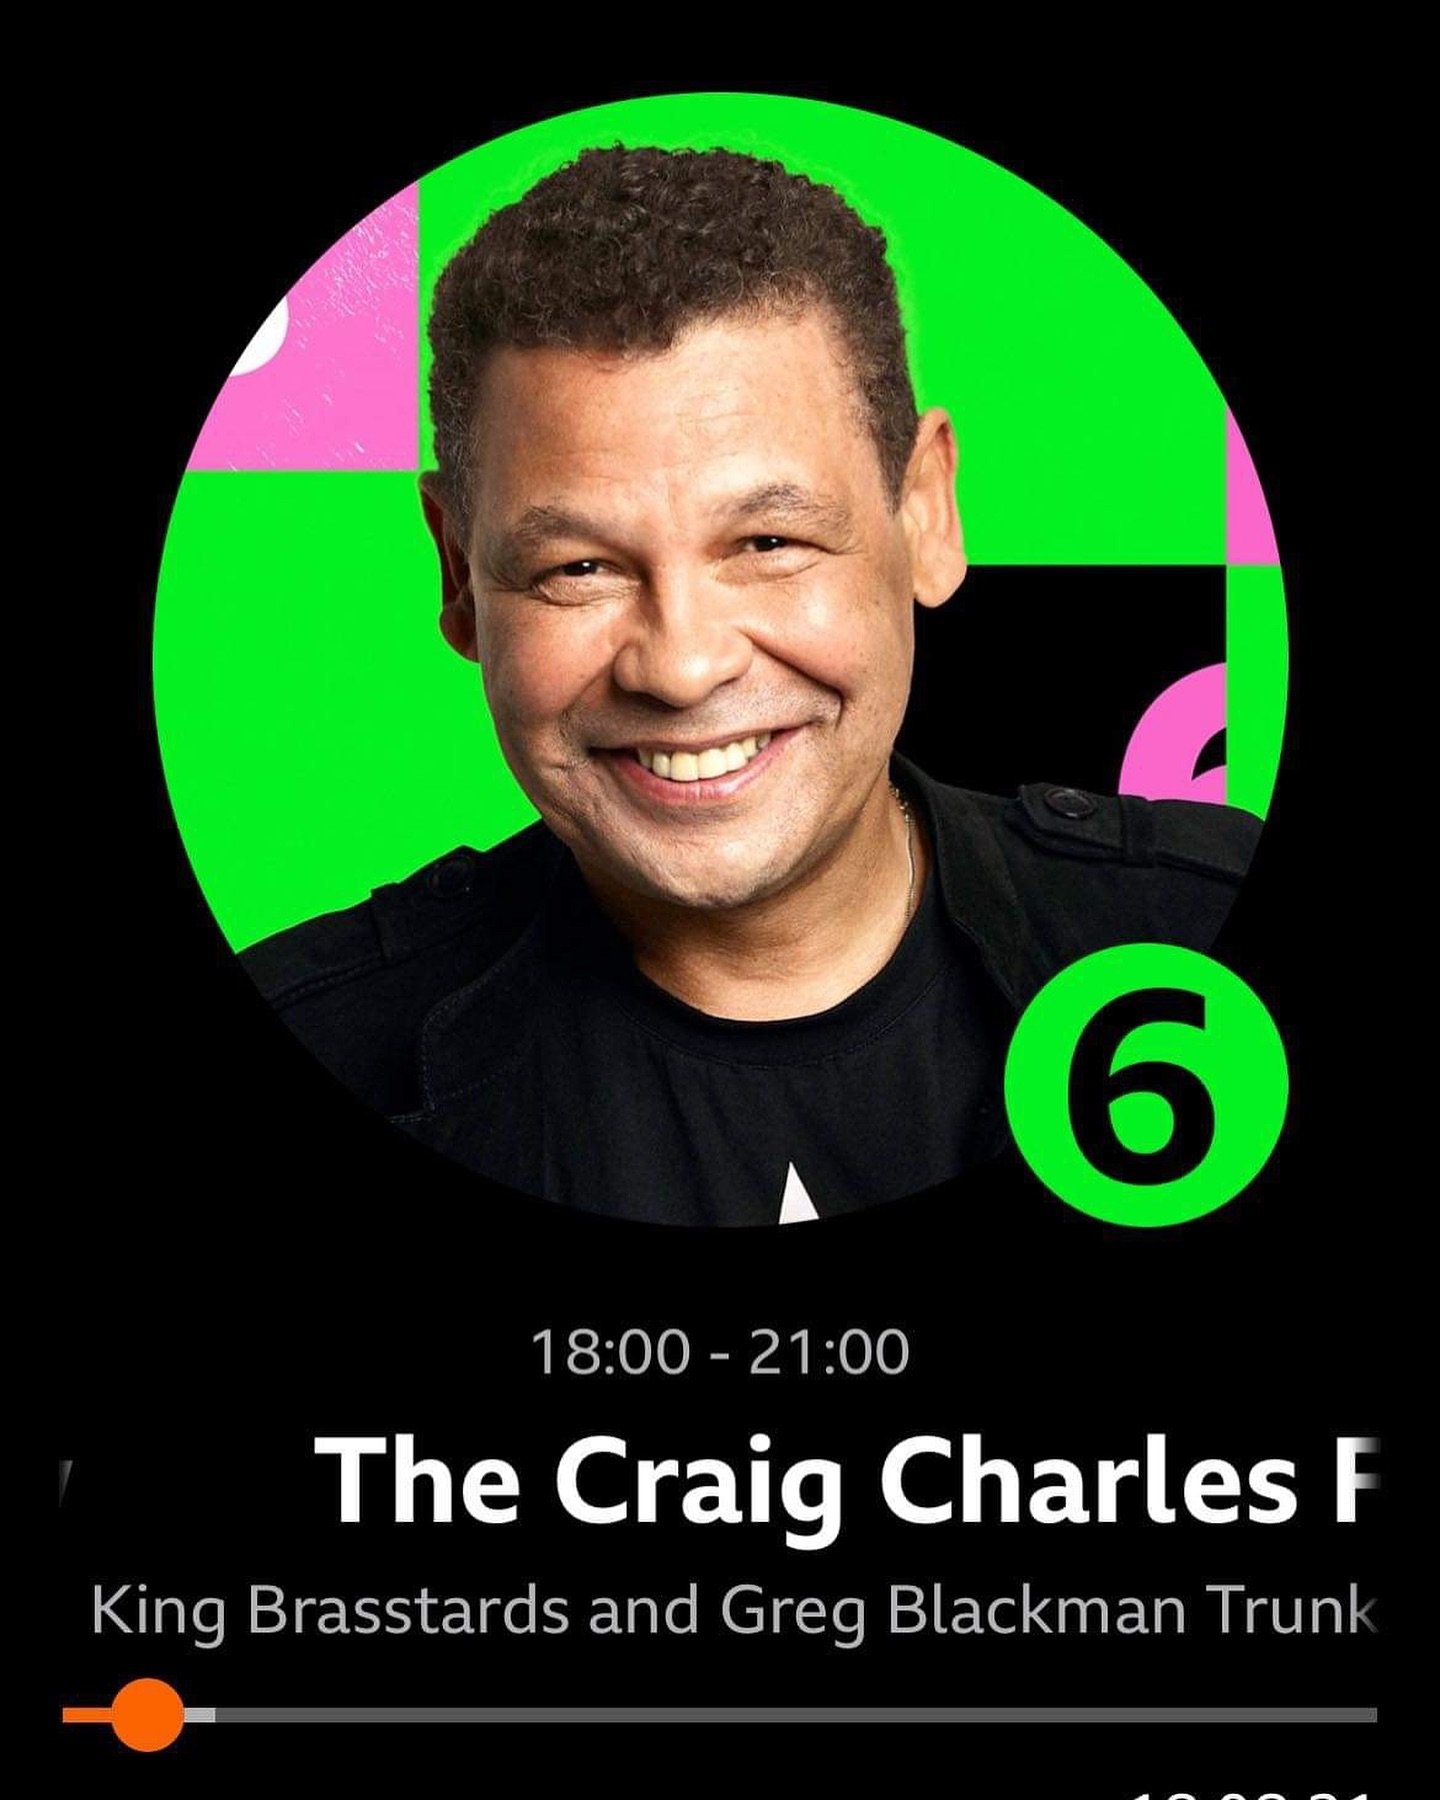 Tune in now to our joint Trunk of Funk with @mrgregblackman on @bbc6music with the one and only @craigcharlesfunkandsoul Just search &lsquo;Craig Charles&rsquo; on BBC sounds or on your browser/smart speaker 😎 #trunkoffunk #craigcharles #6music 

Hu